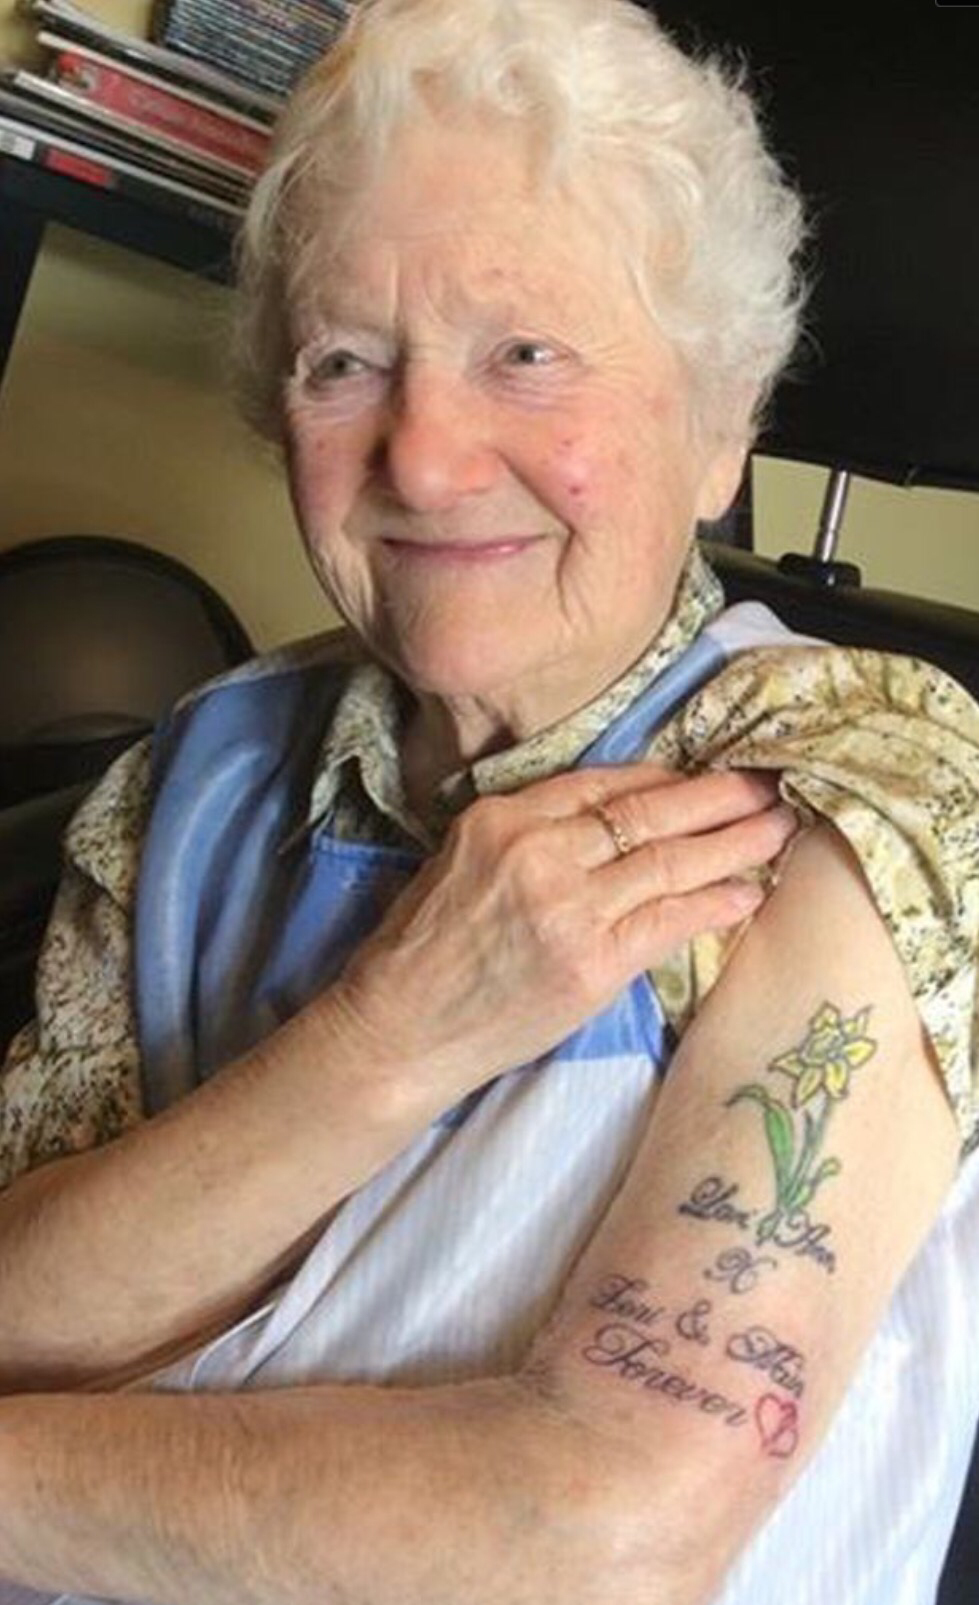 You're never too old to get some fresh ink – Things&Ink